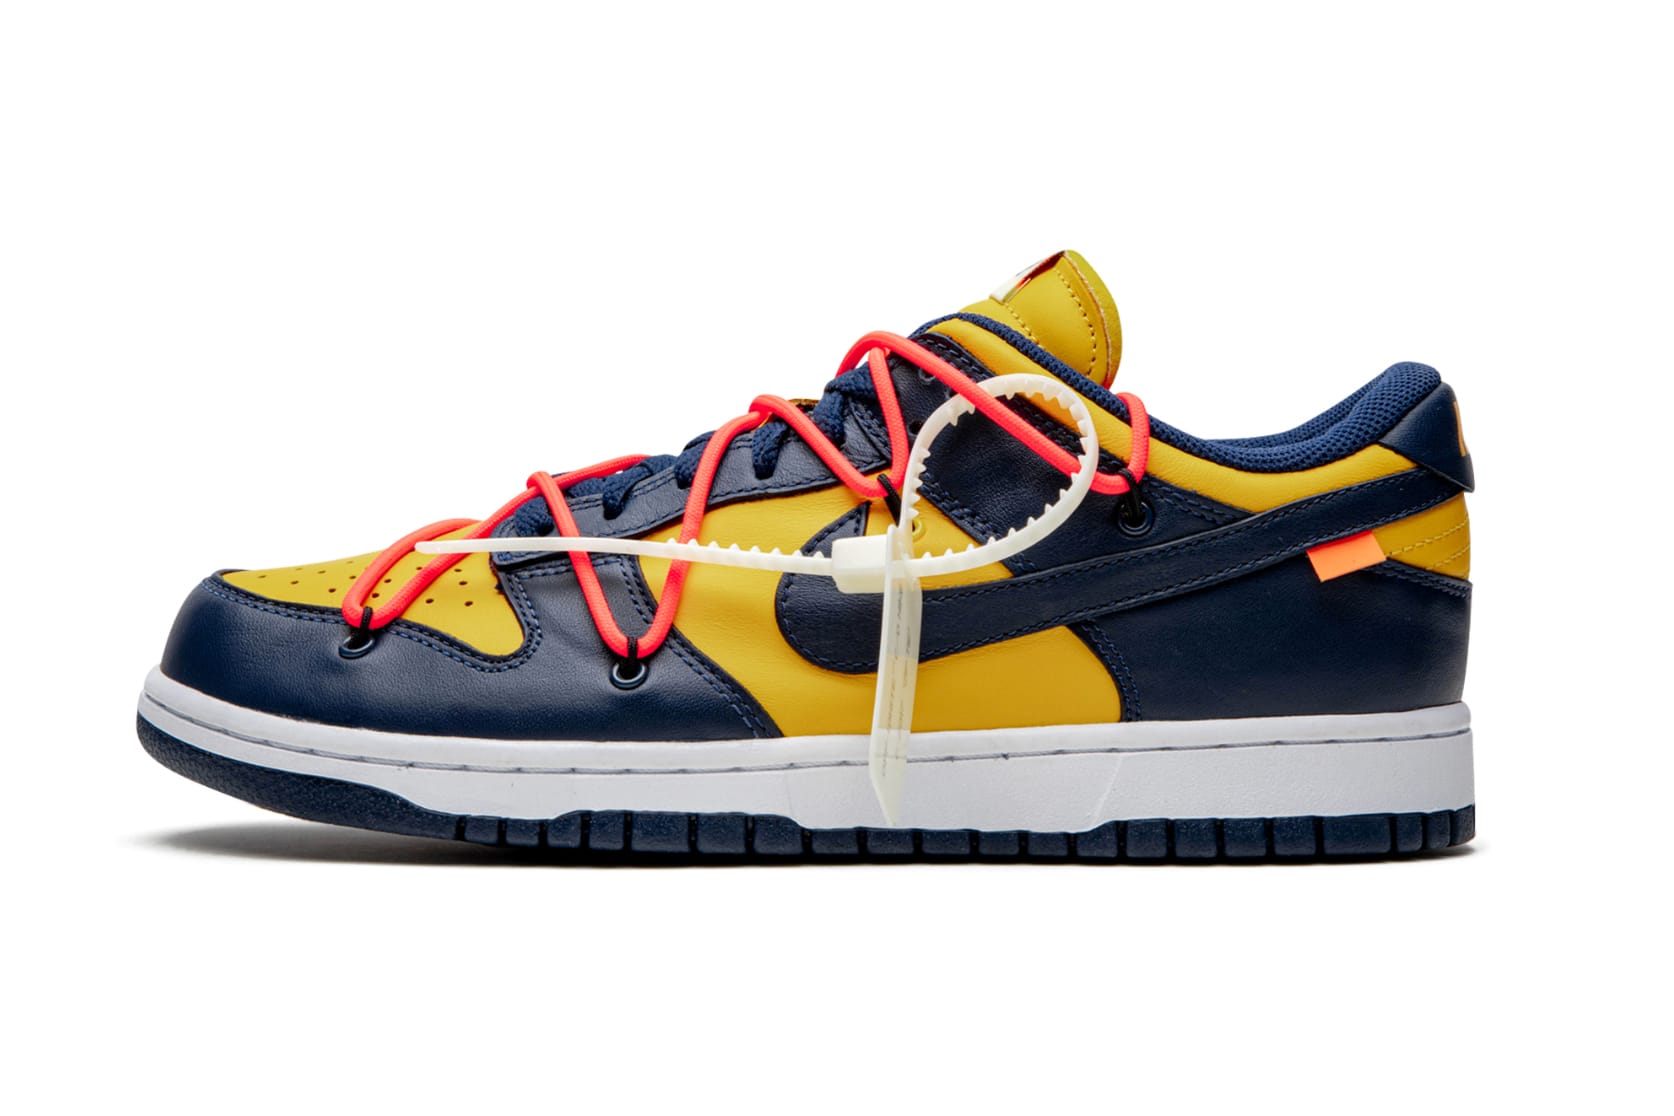 yellow and blue nike dunks